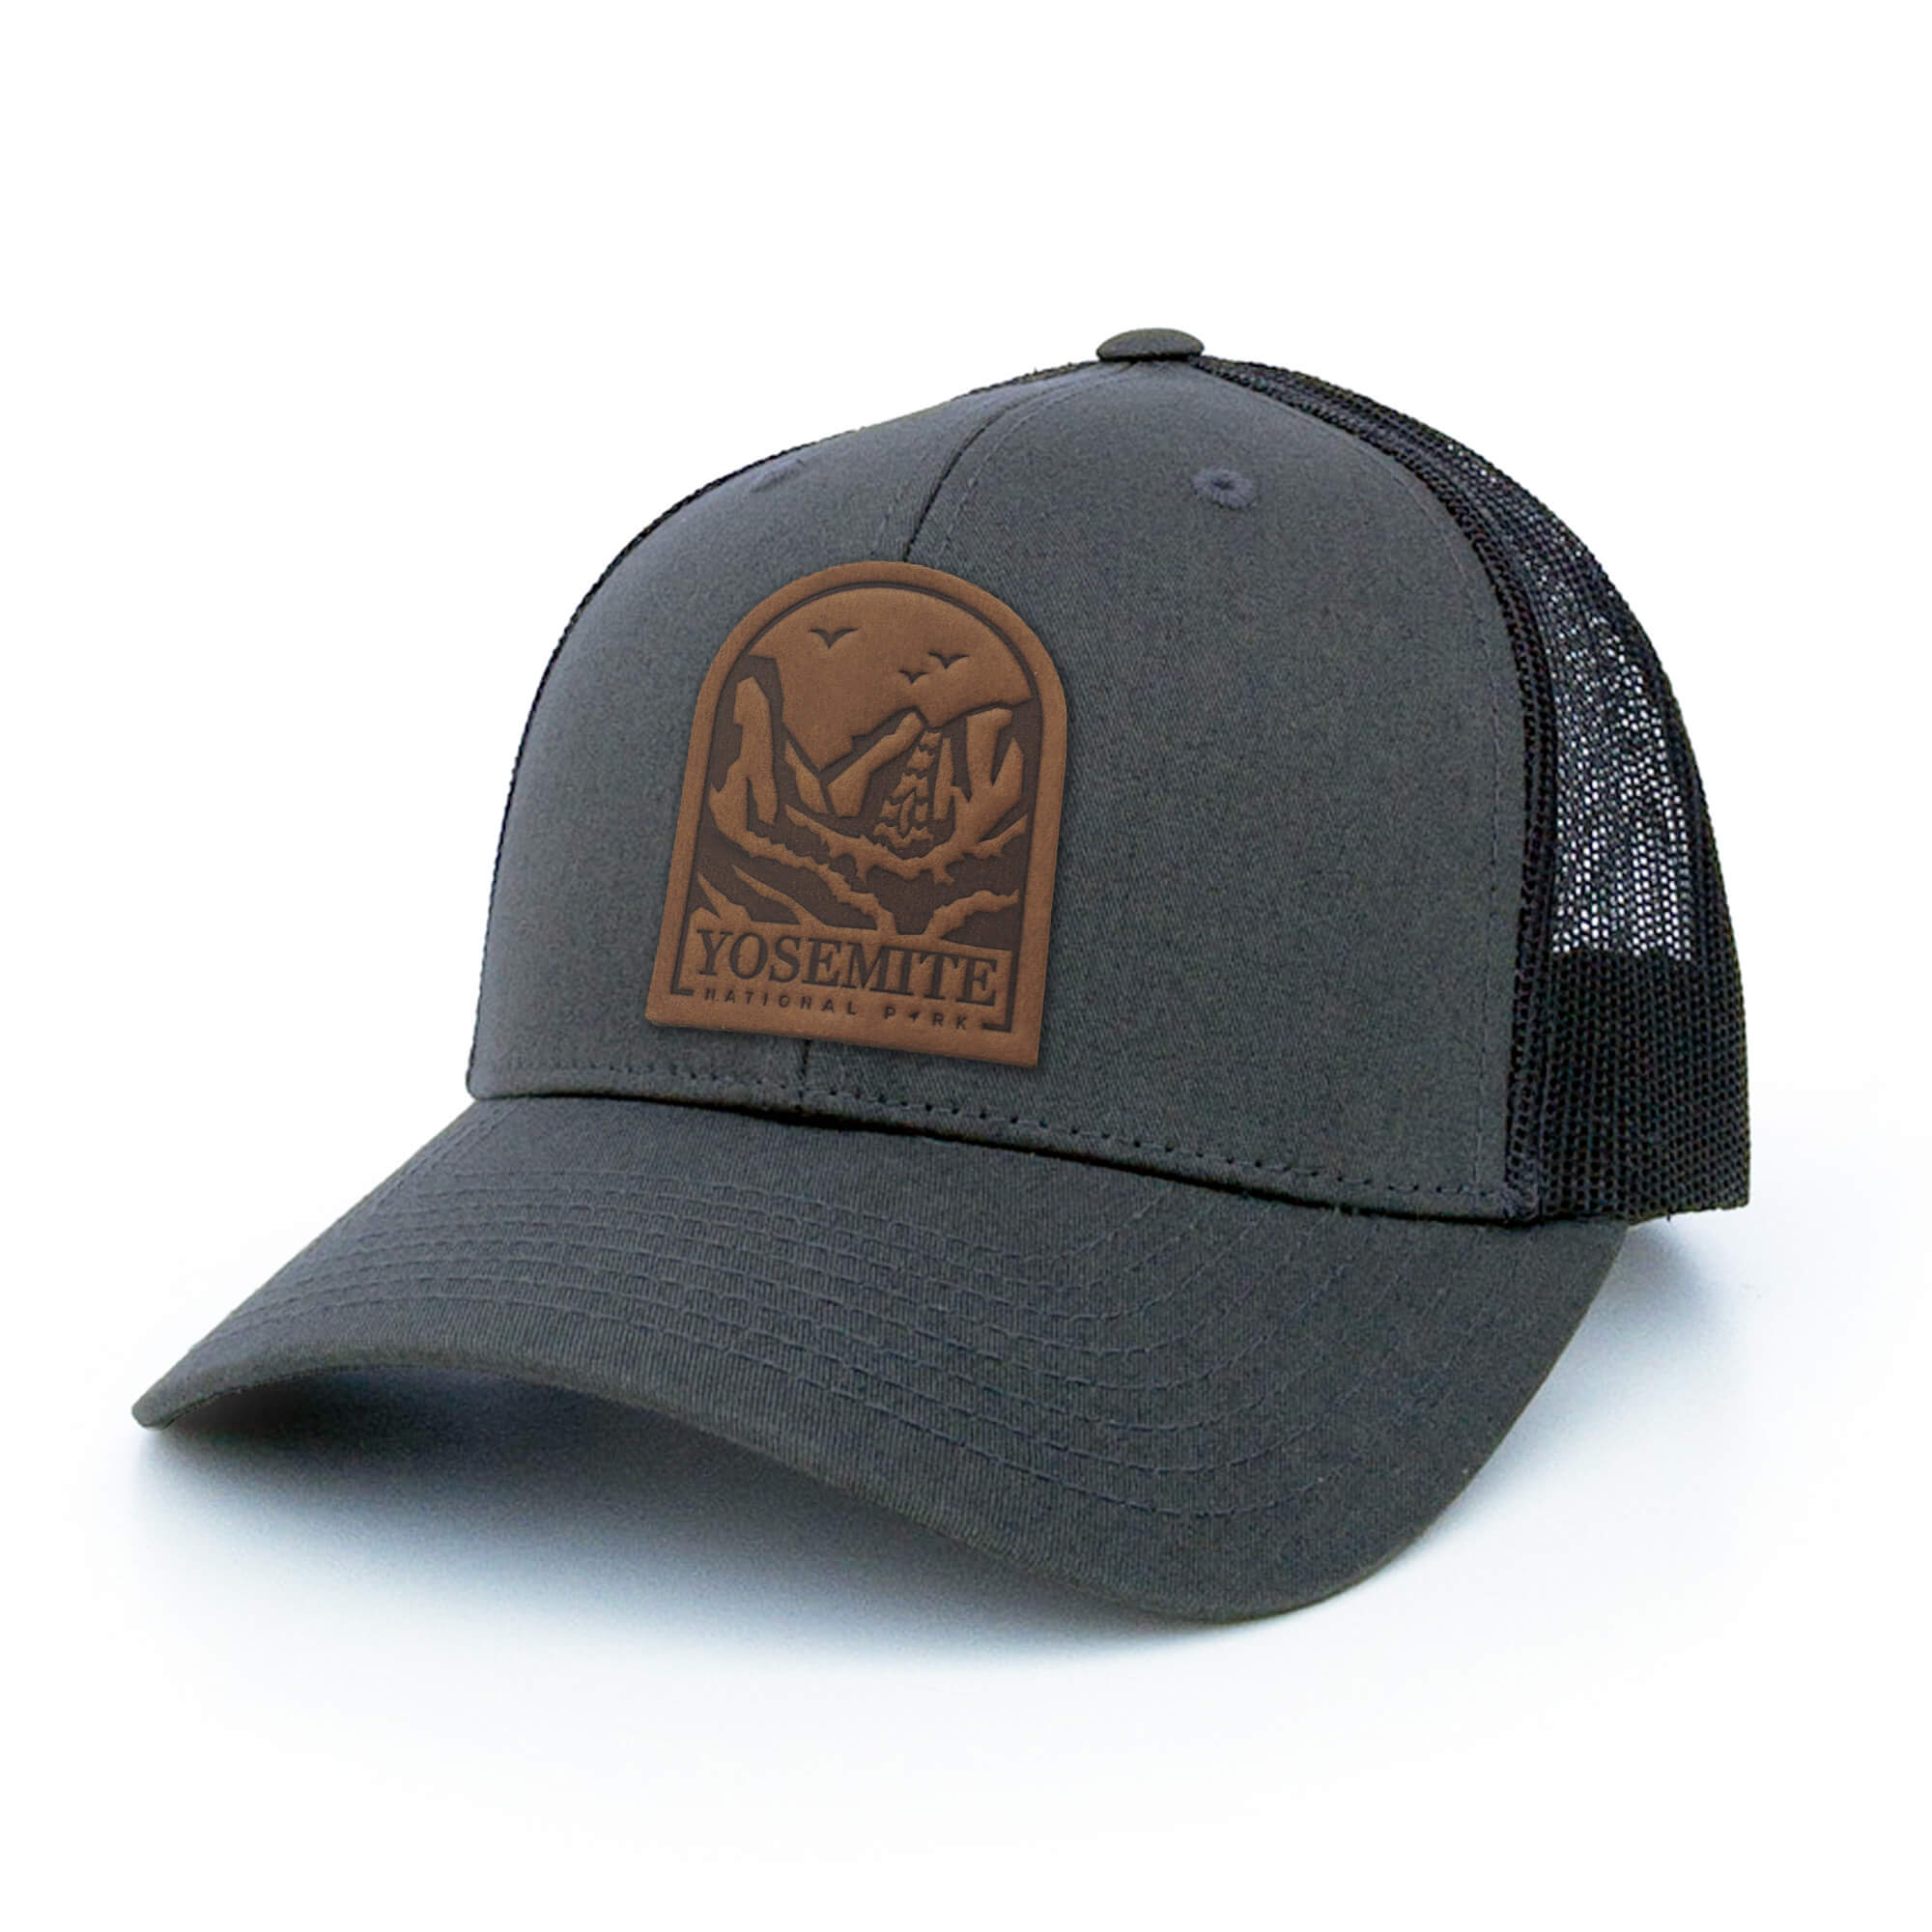 Charcoal trucker hat with full-grain leather patch of Yosemite National Park | BLACK-007-002, CHARC-007-002, NAVY-007-002, HGREY-007-002, MOSS-007-002, BROWN-007-002